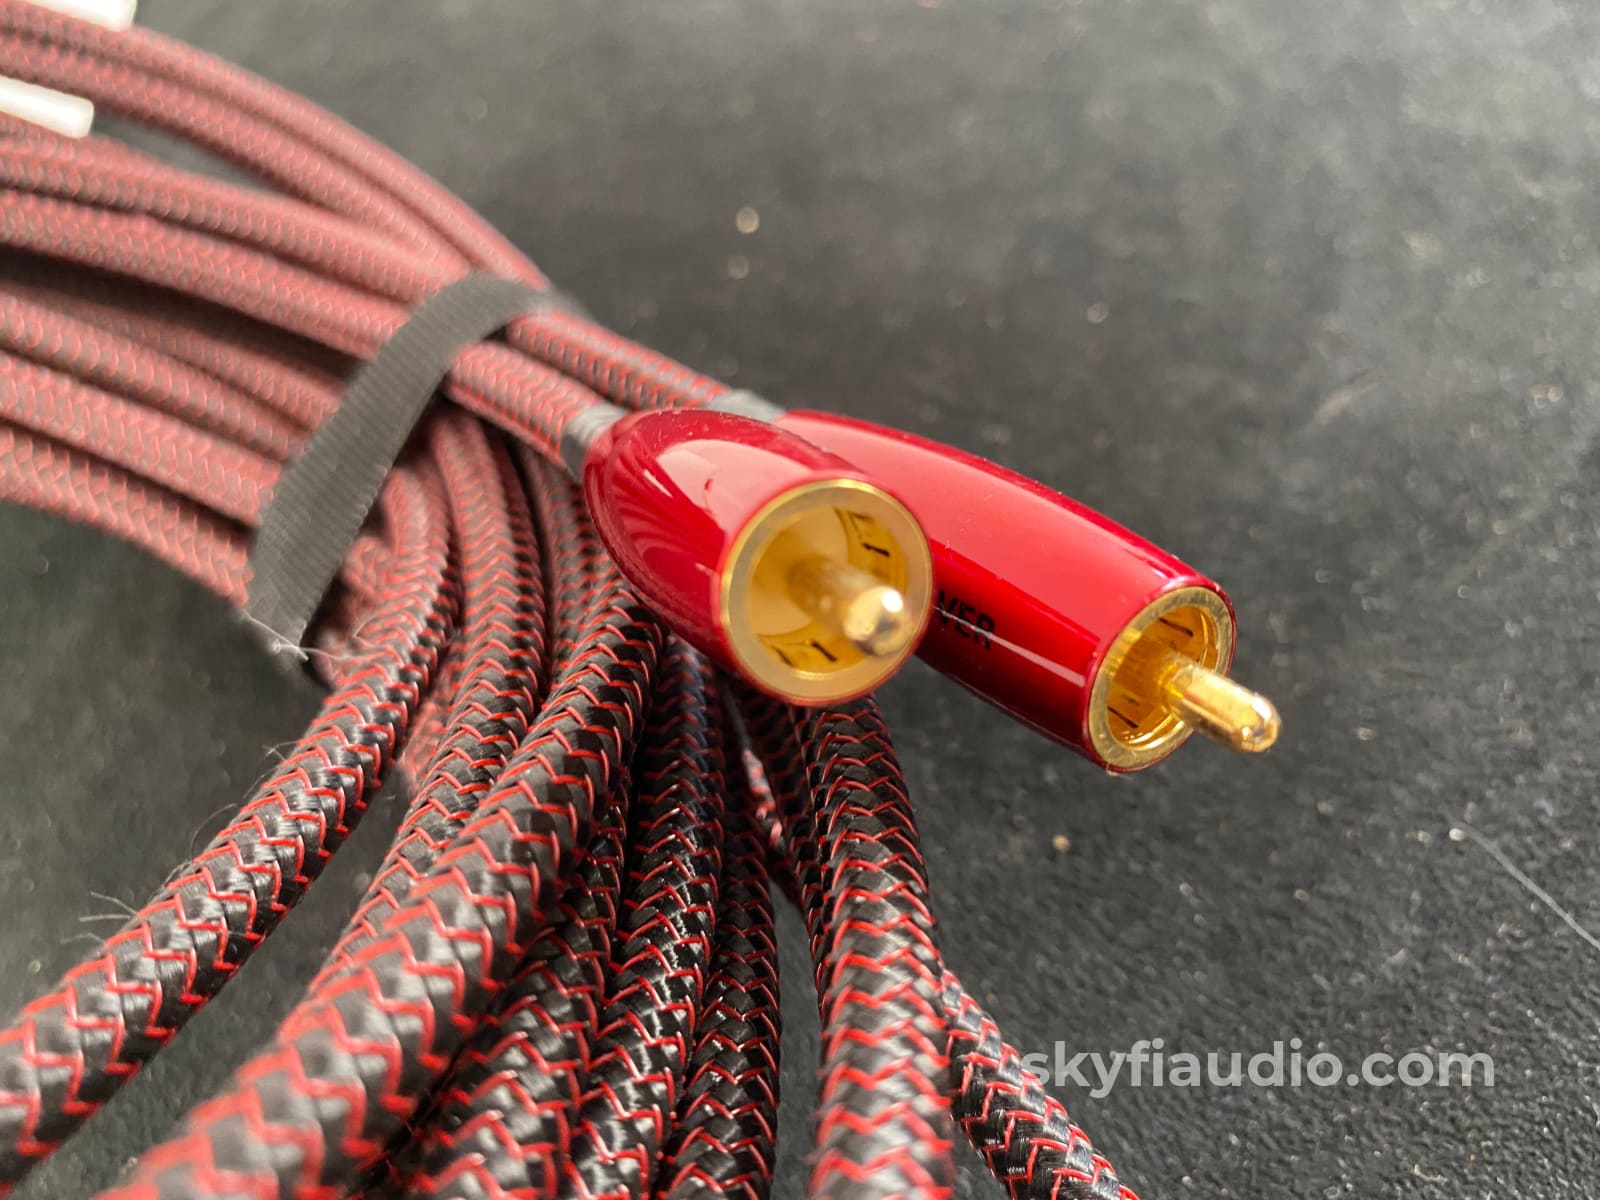 Audioquest Red River Rca Audio Cable - Super Long Custom 20Ft Perfect For Amps Cables